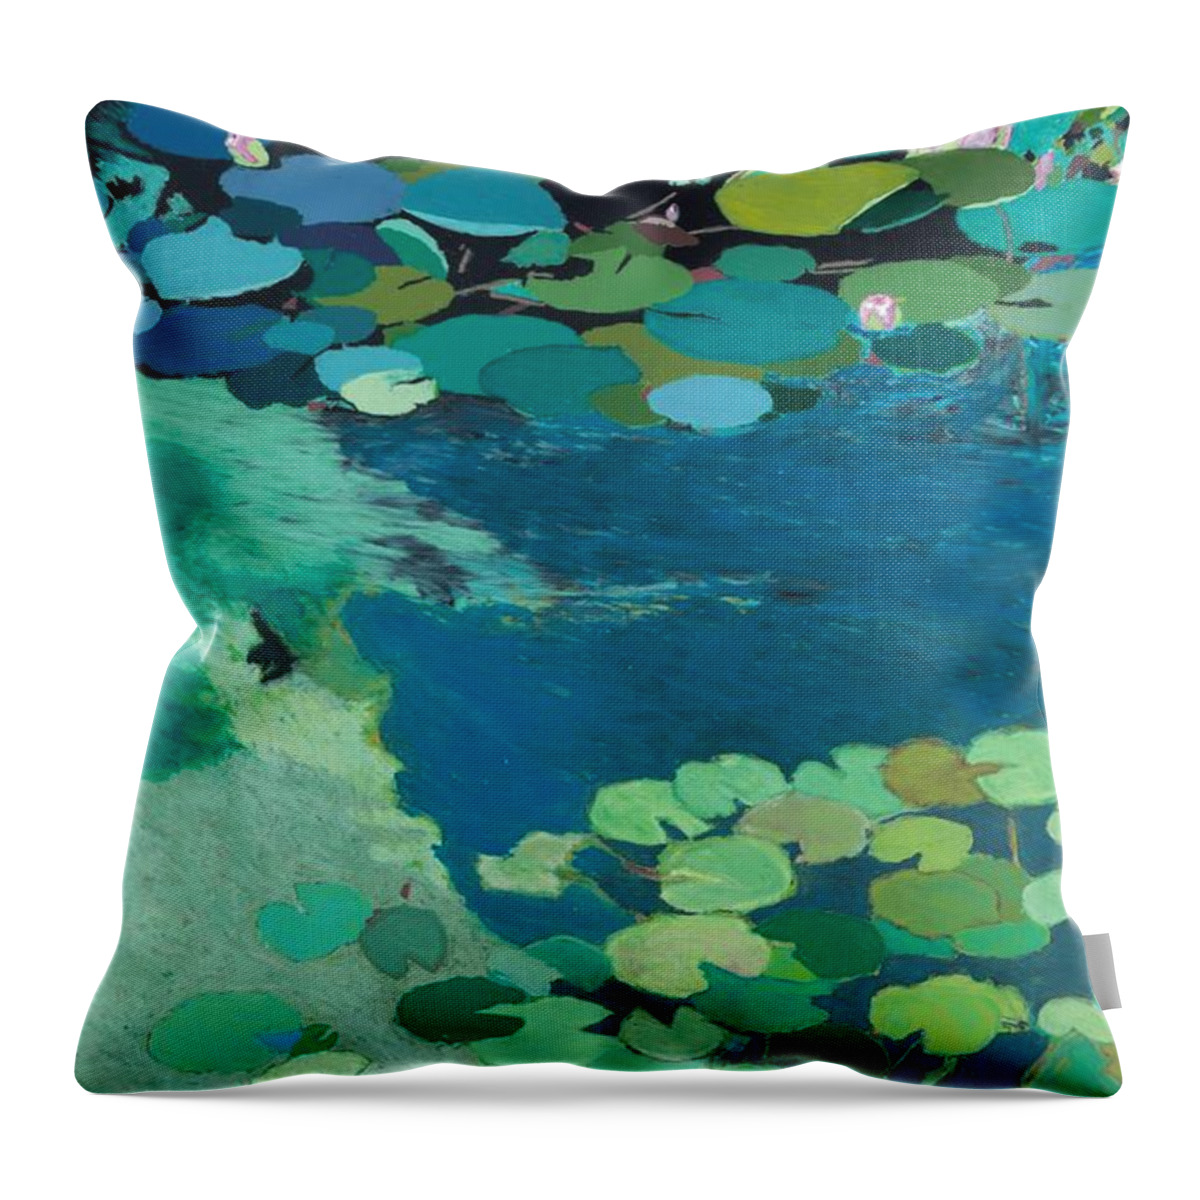 Landscape Throw Pillow featuring the painting Moonlit Shadows by Allan P Friedlander